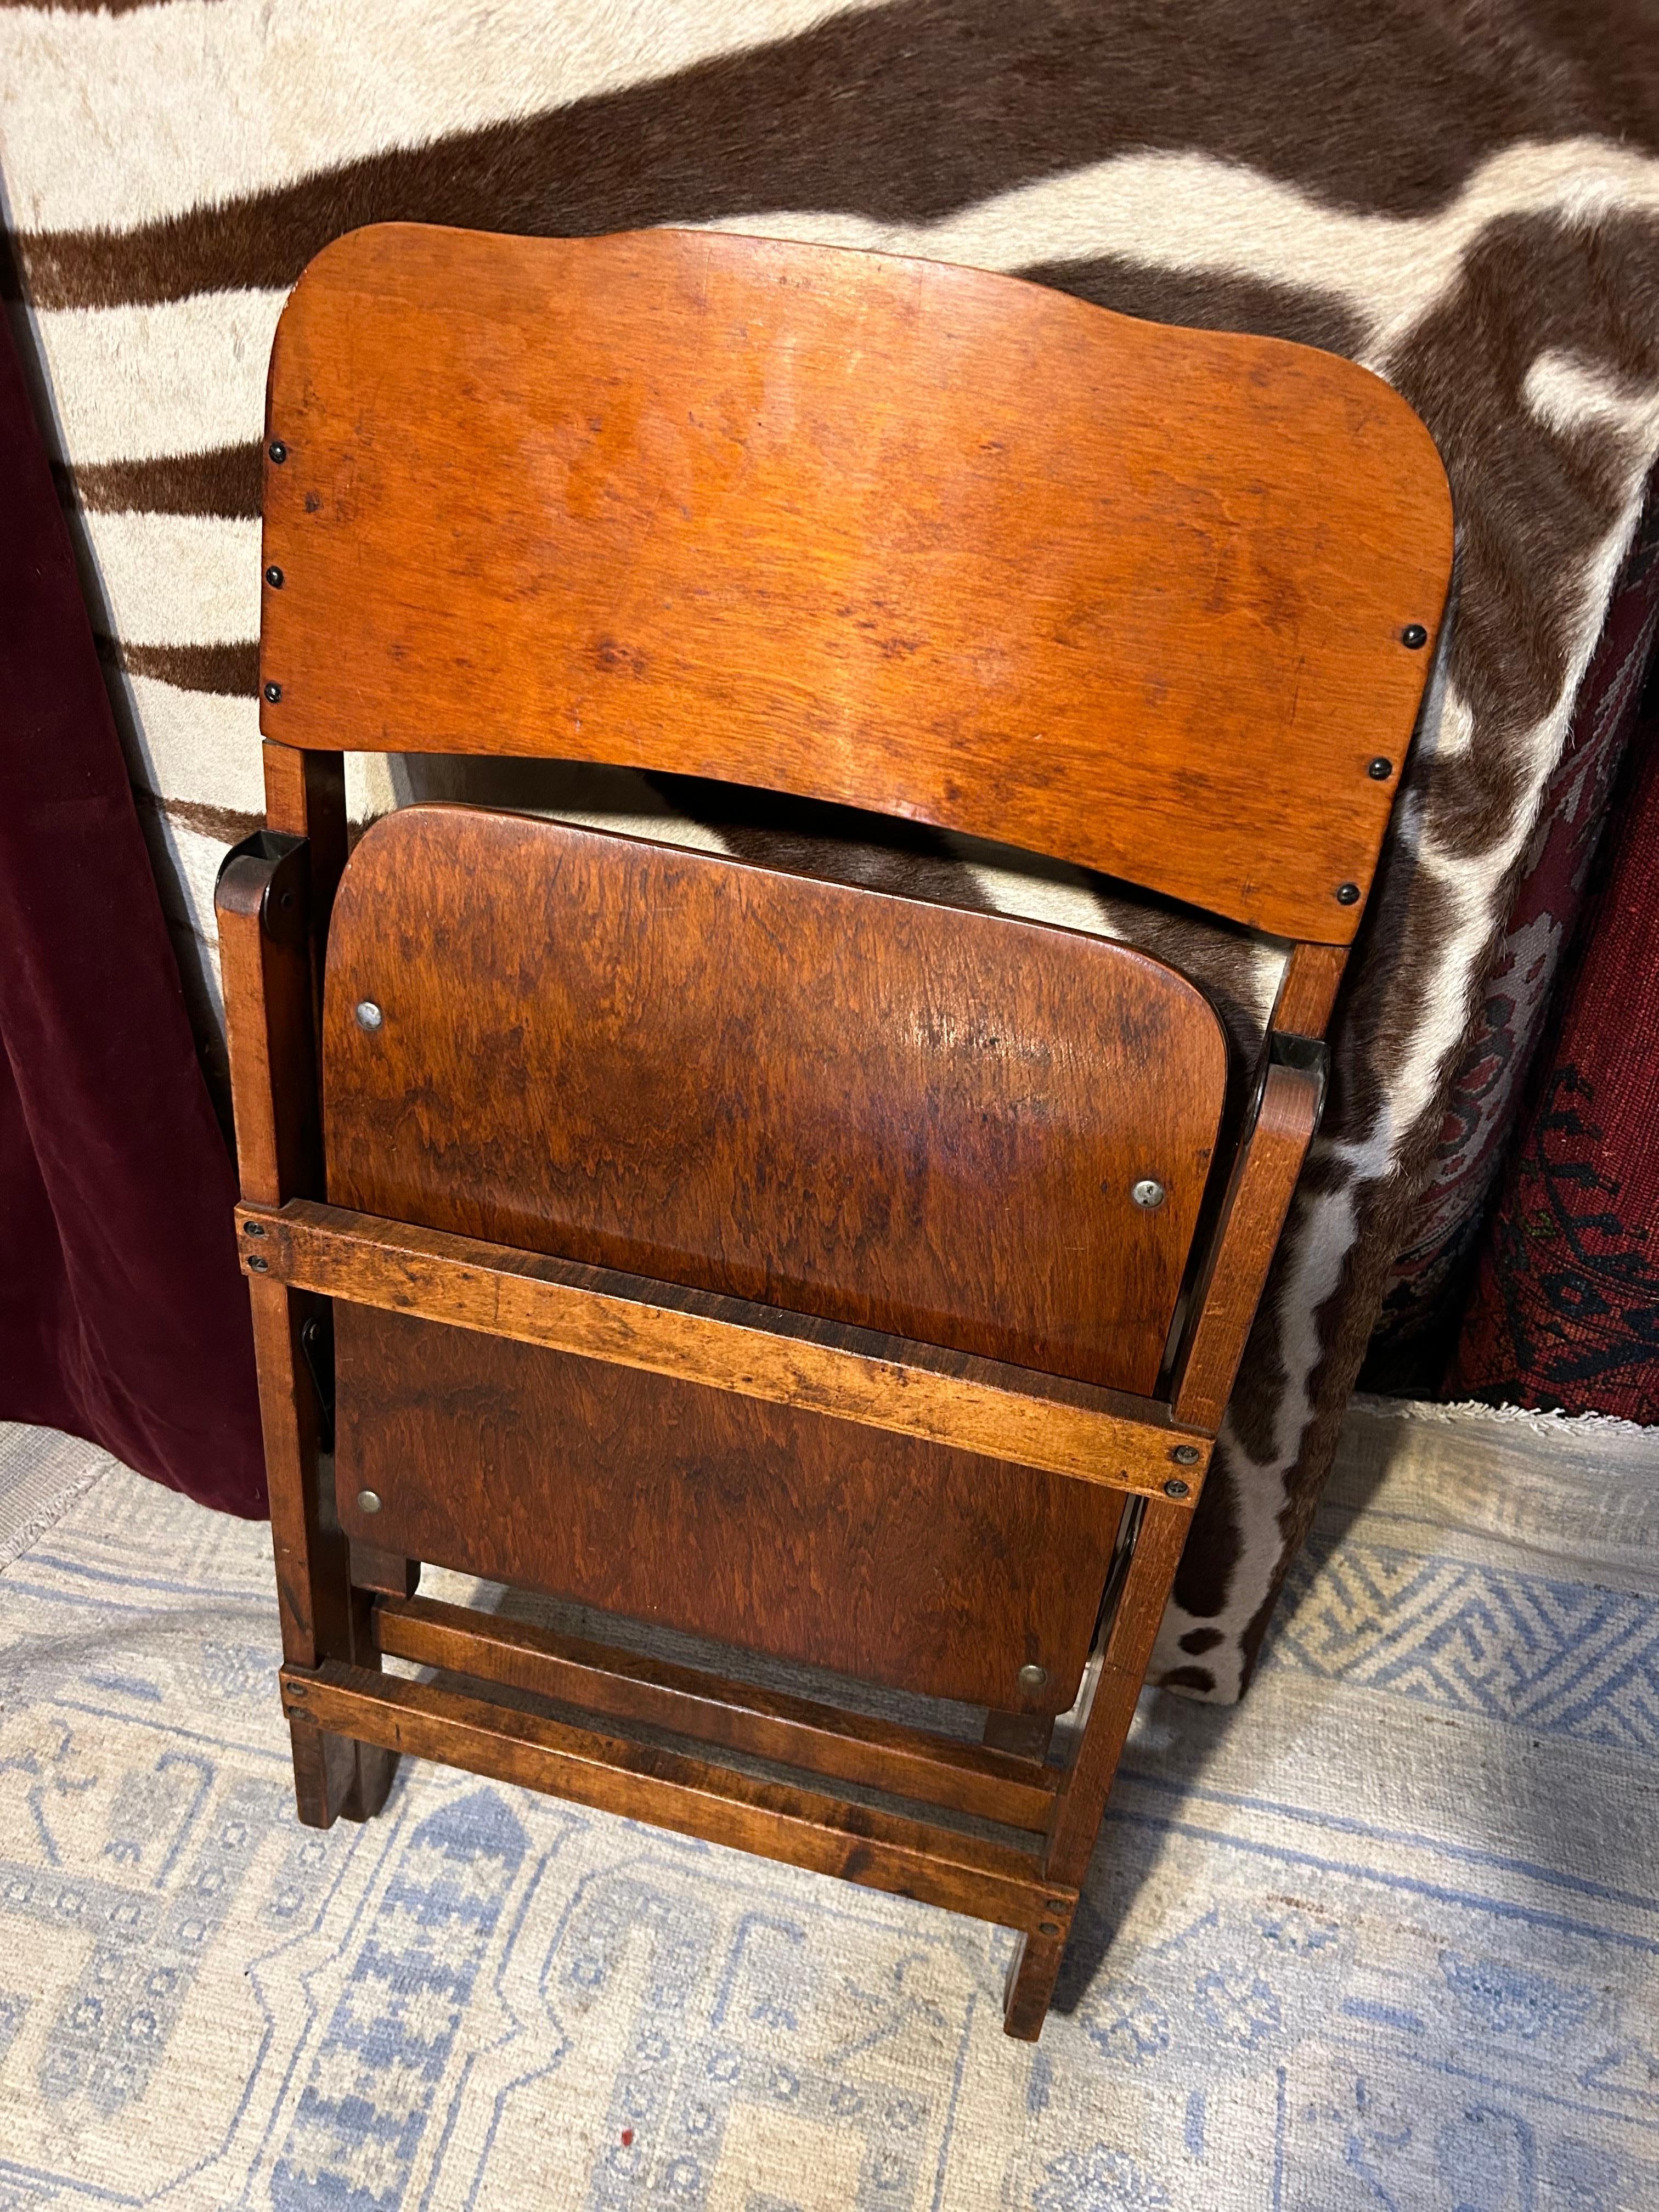 Hand-Carved 19th Century Steamed Wood Folding Campaign Chair With Metal Hardware For Sale